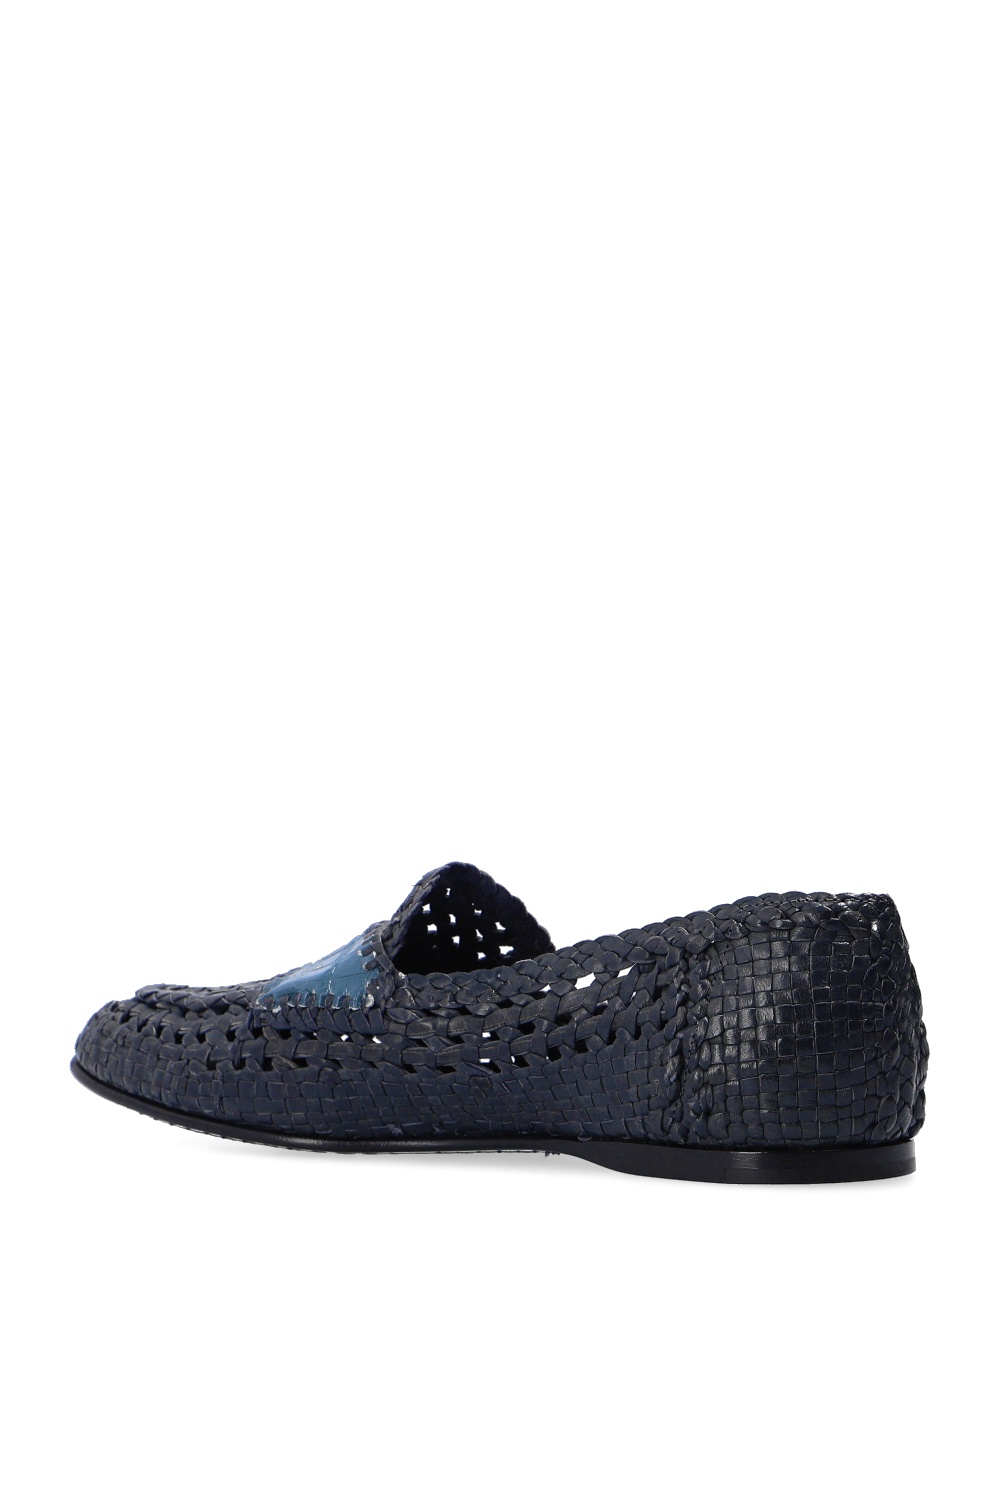 Dolce & Gabbana sequin-embellished double-breasted suit Leather loafers